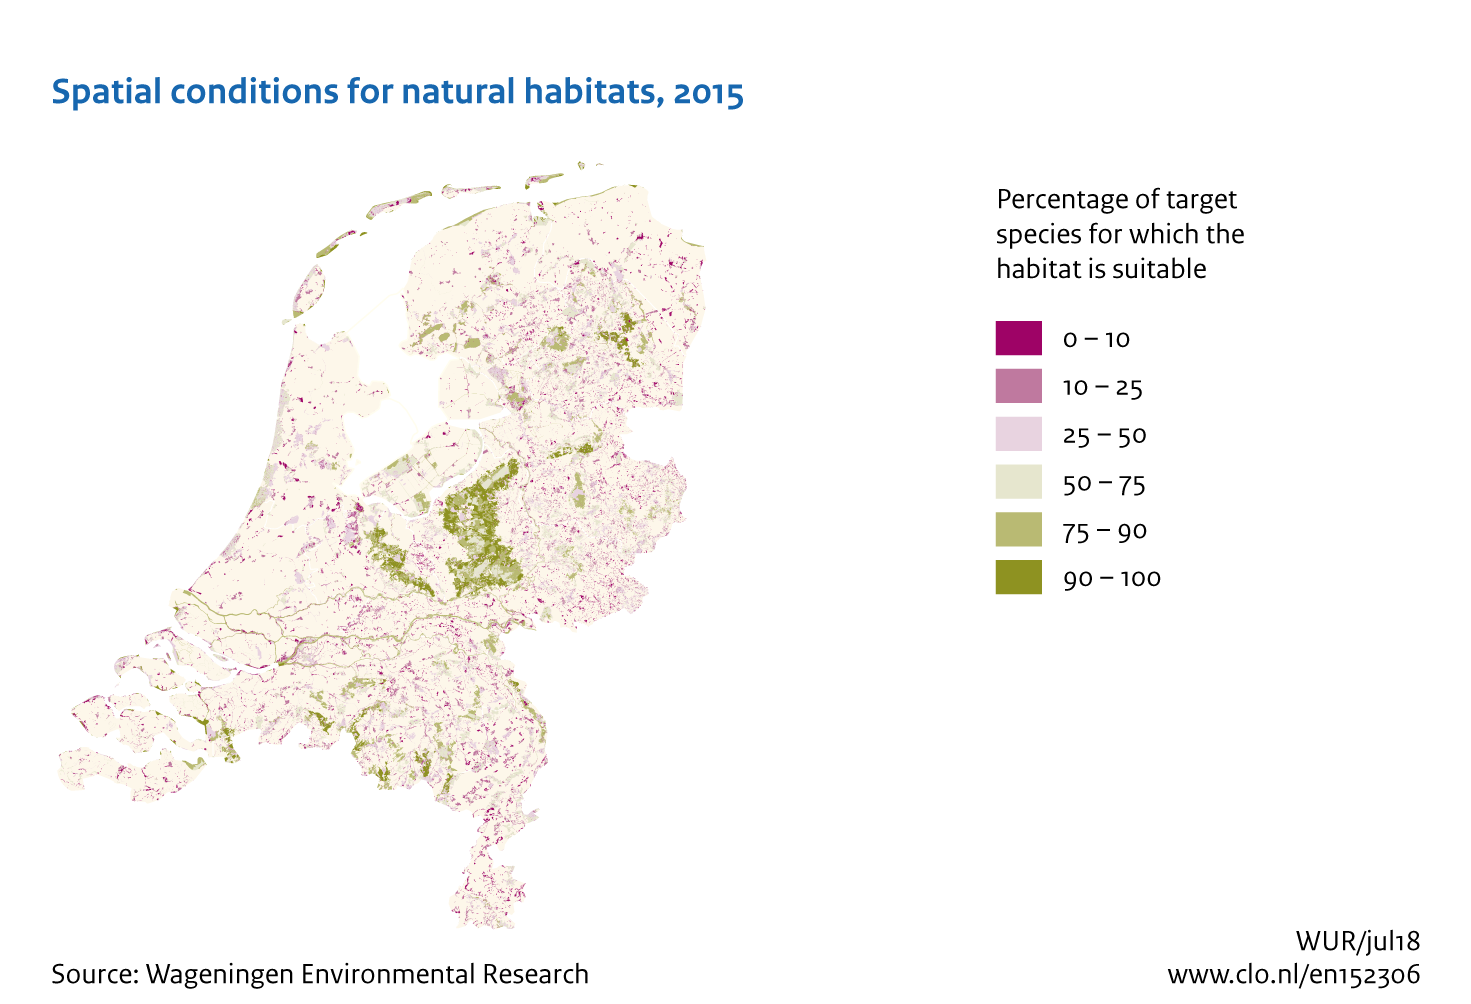 Image Spatial conditions for natural habitats. The image is further explained in the text.